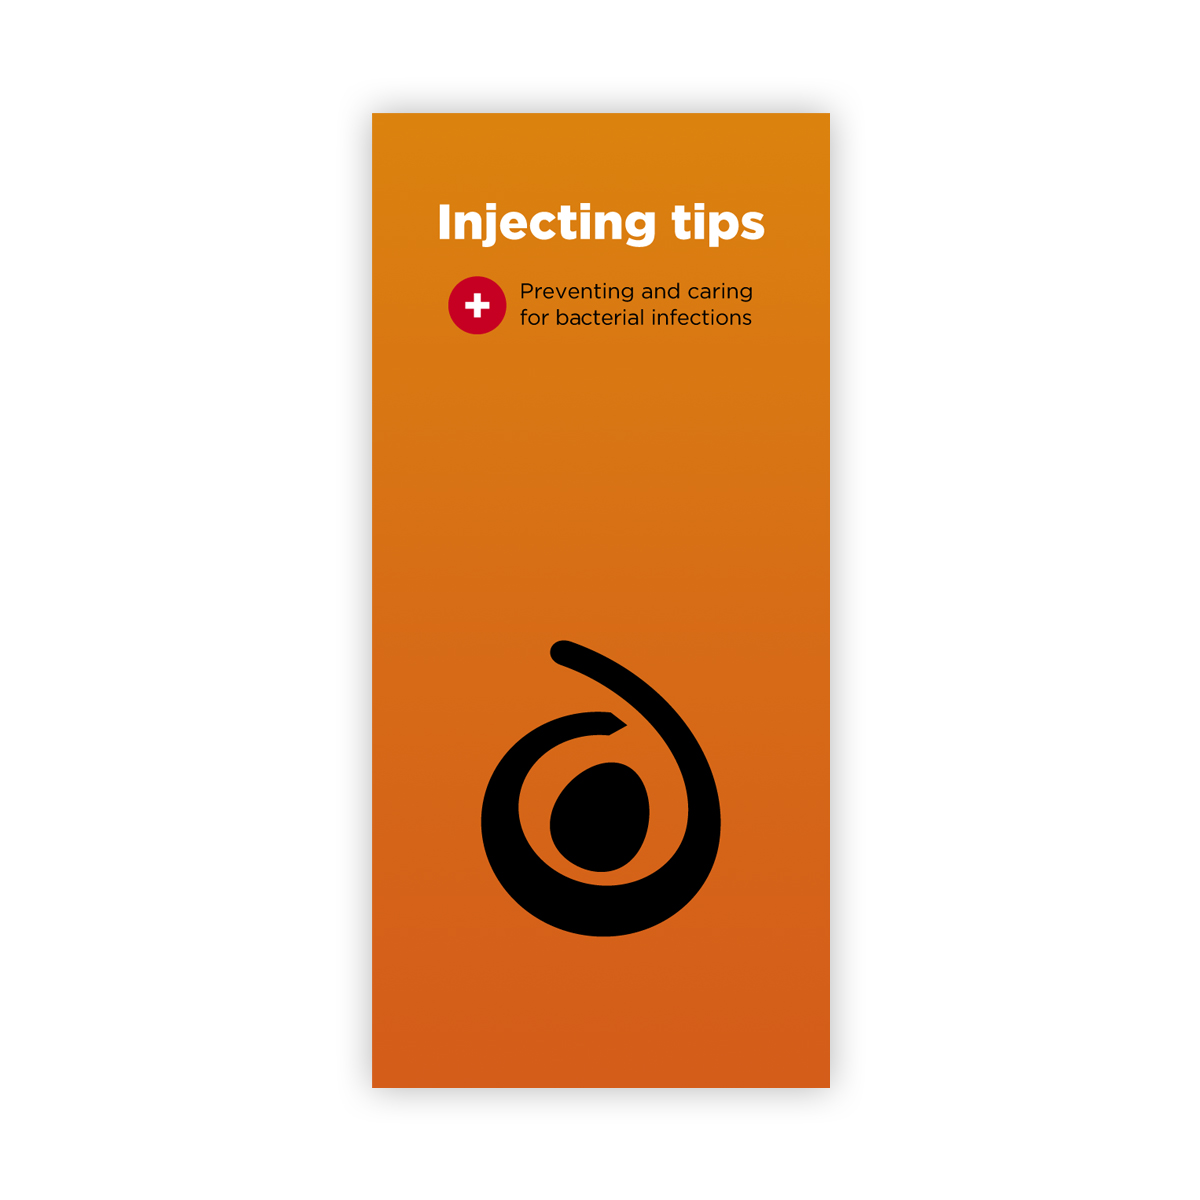 Injecting Tips #1: Bacterial infections